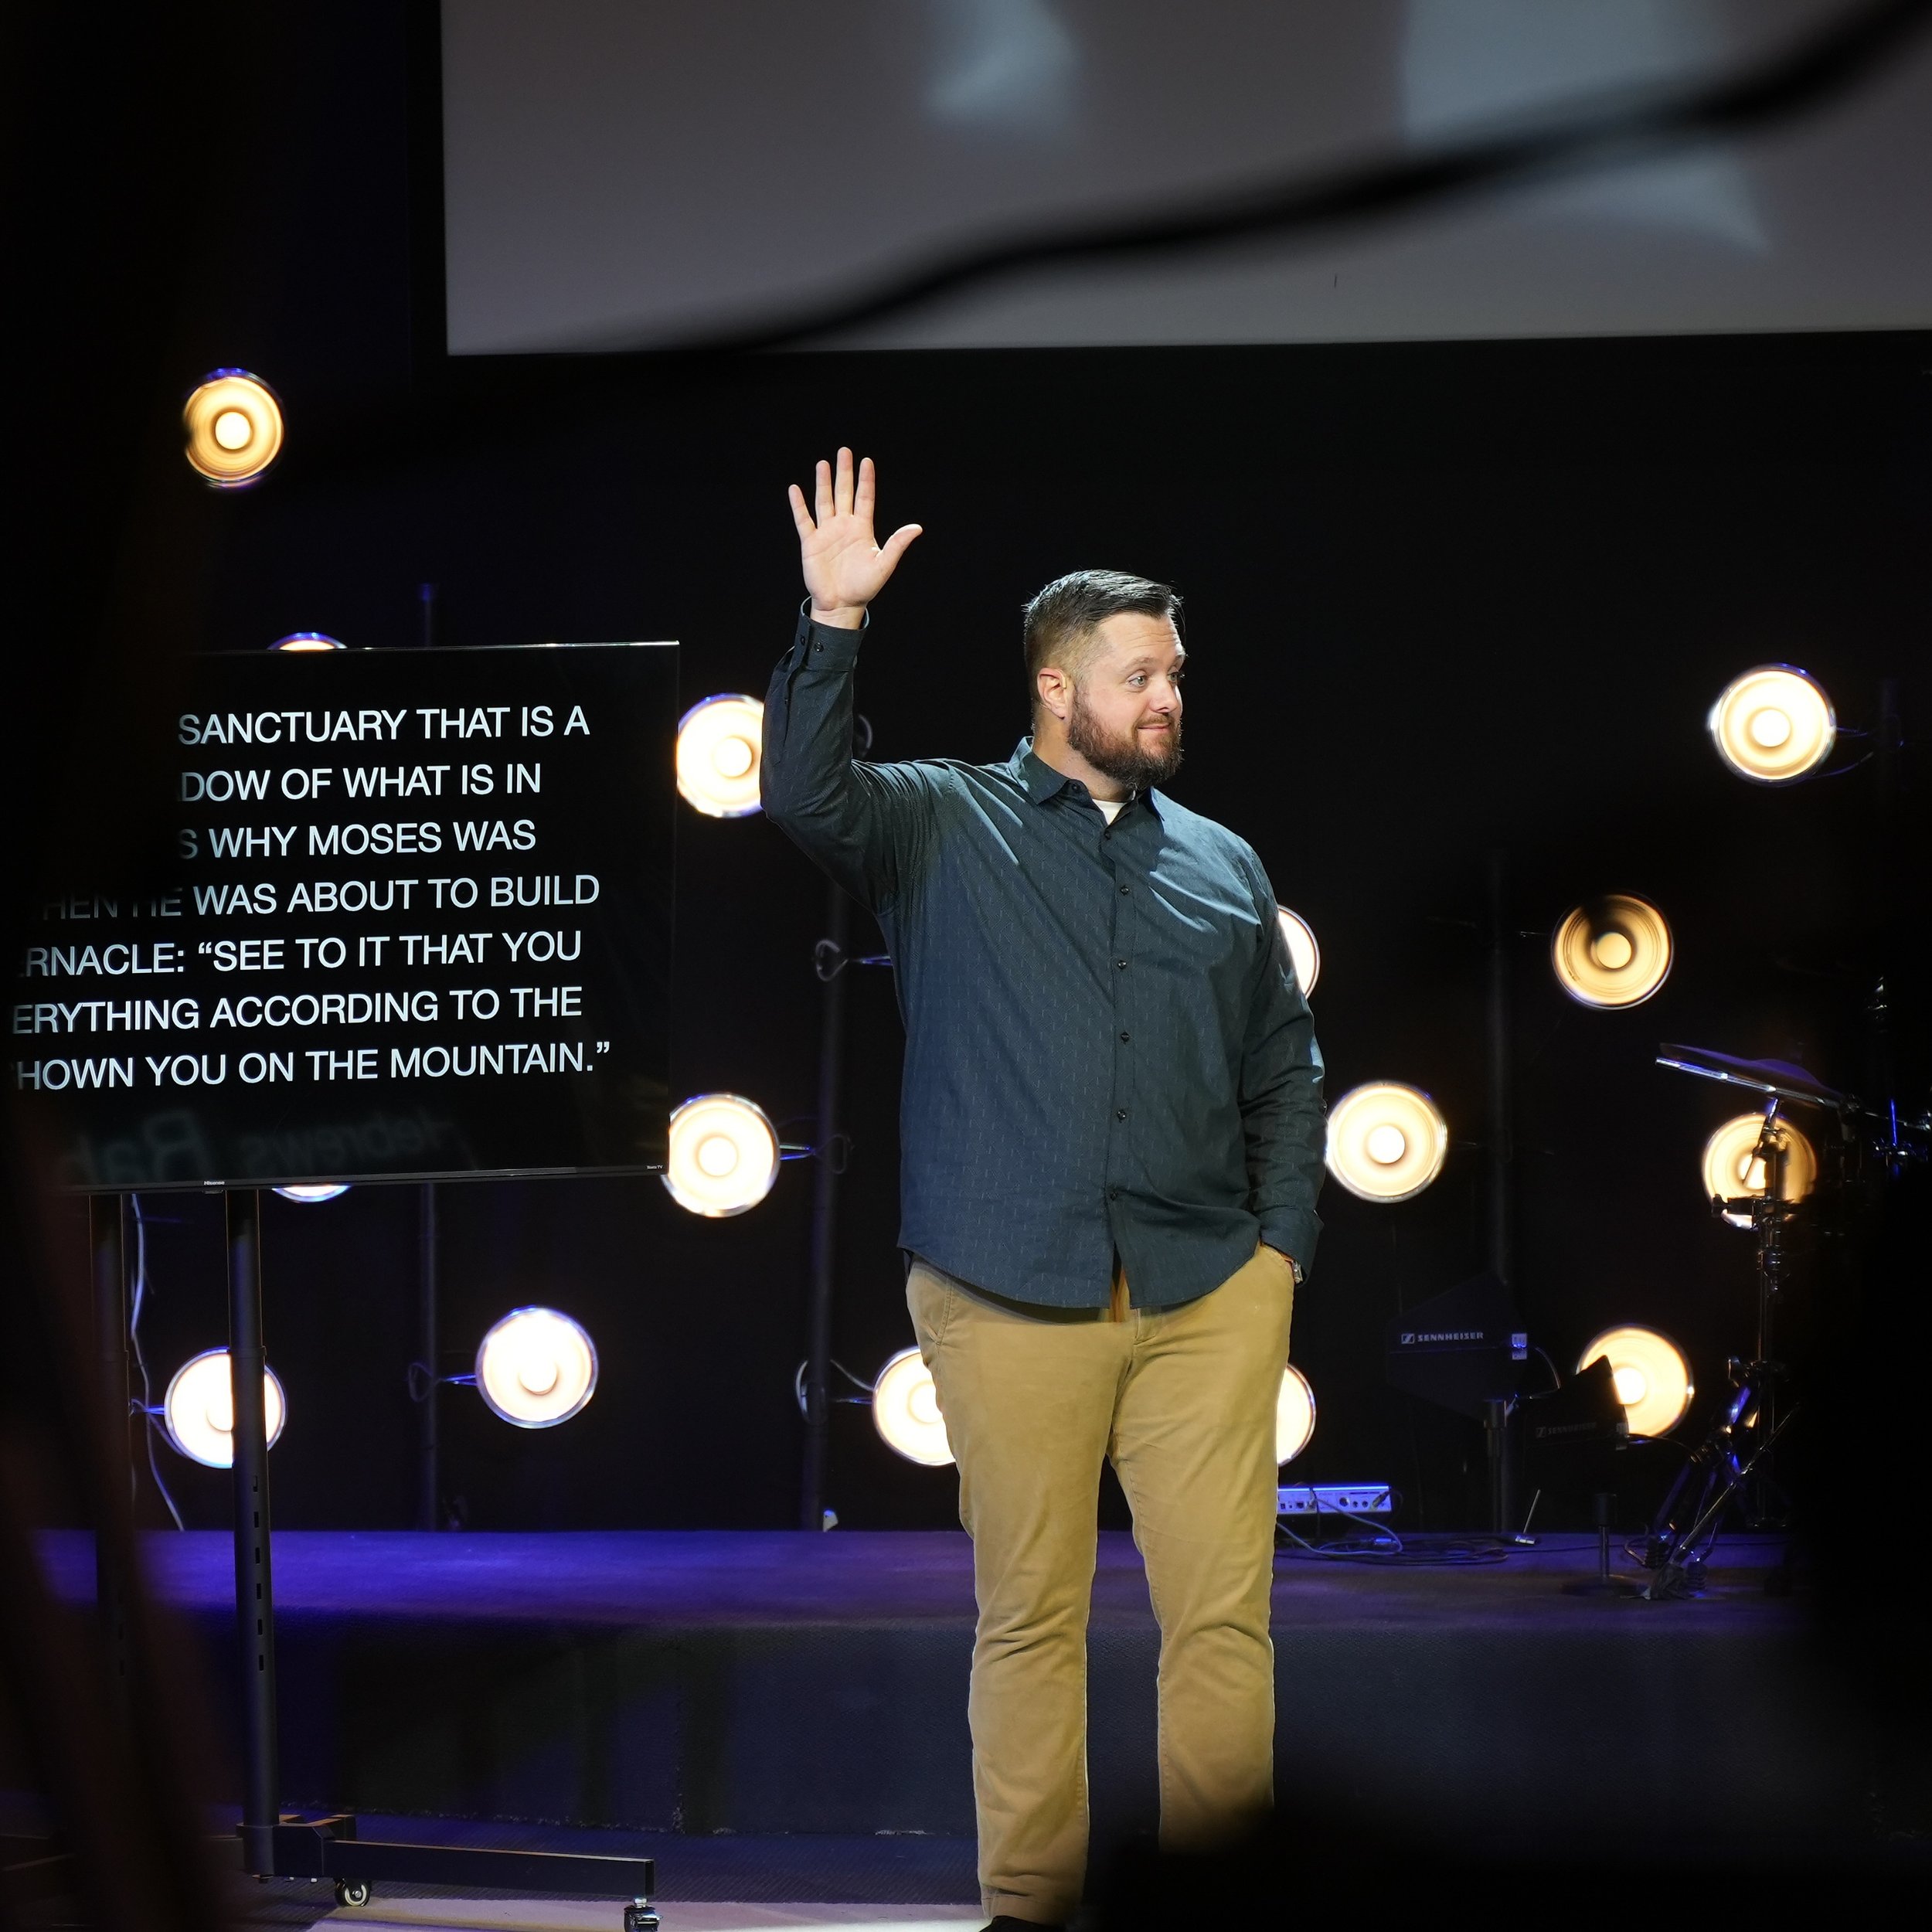 Raise your hand if you&rsquo;re excited for Sabbatical!

Join us tomorrow for Sean&rsquo;s last sermon before starting Sabbatical, and to wish him and his family a fruitful, refreshing, and fun journey!

9am &amp; 11am &bull; 959 Church St W Monmouth